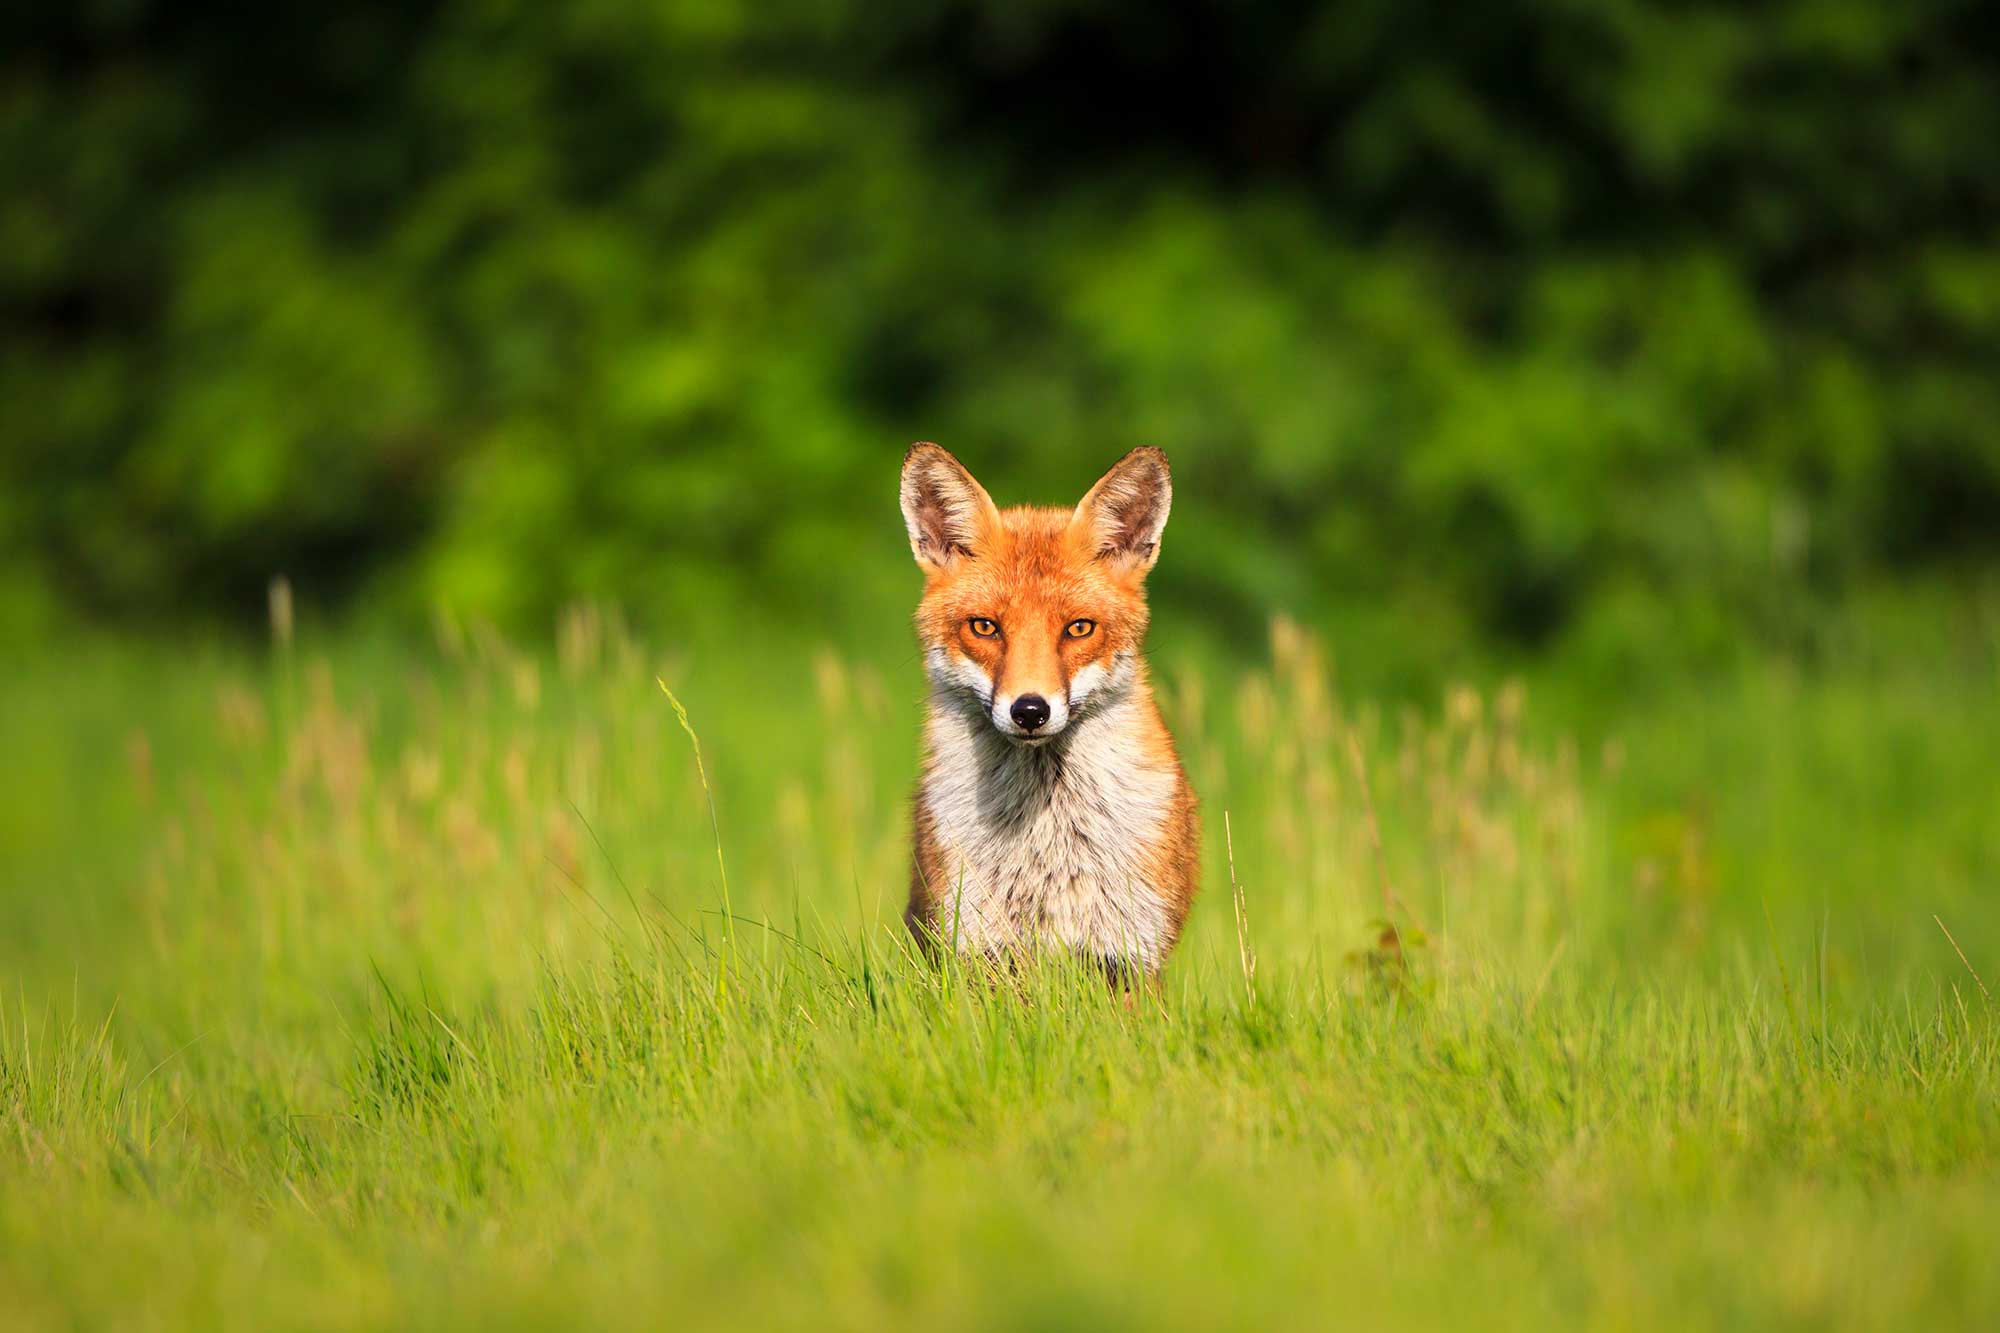 A red fox in the grass